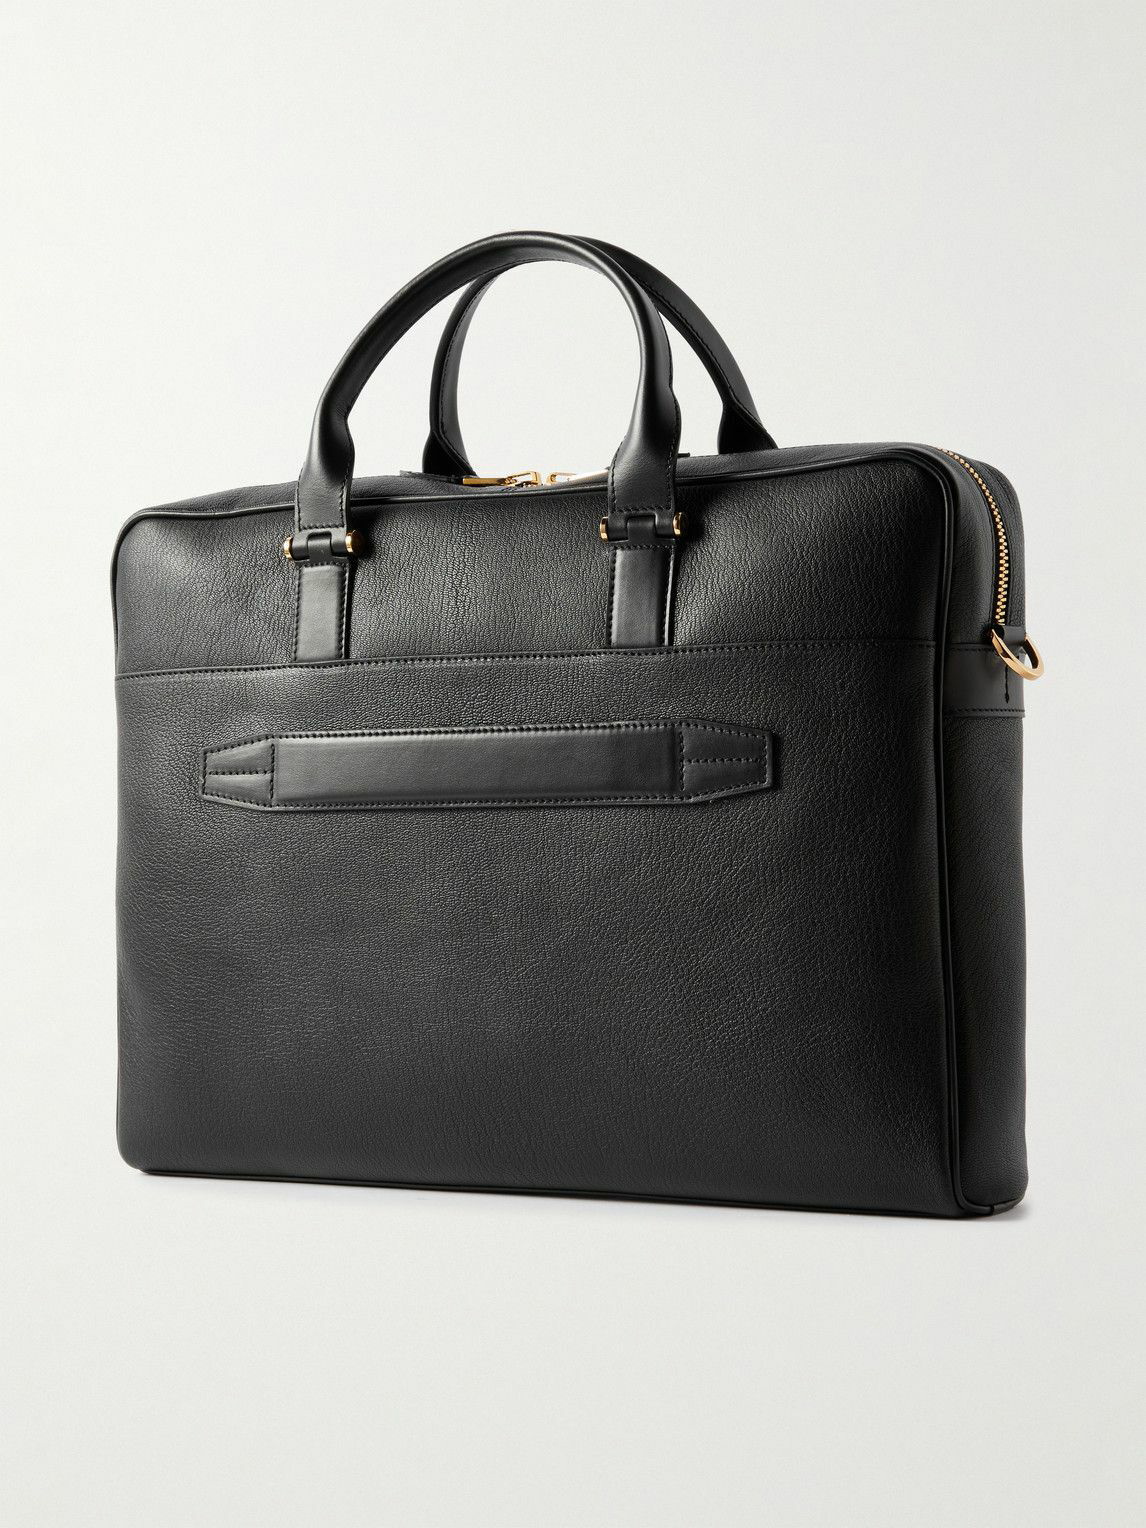 TOM FORD - Full-Grain Leather Briefcase TOM FORD